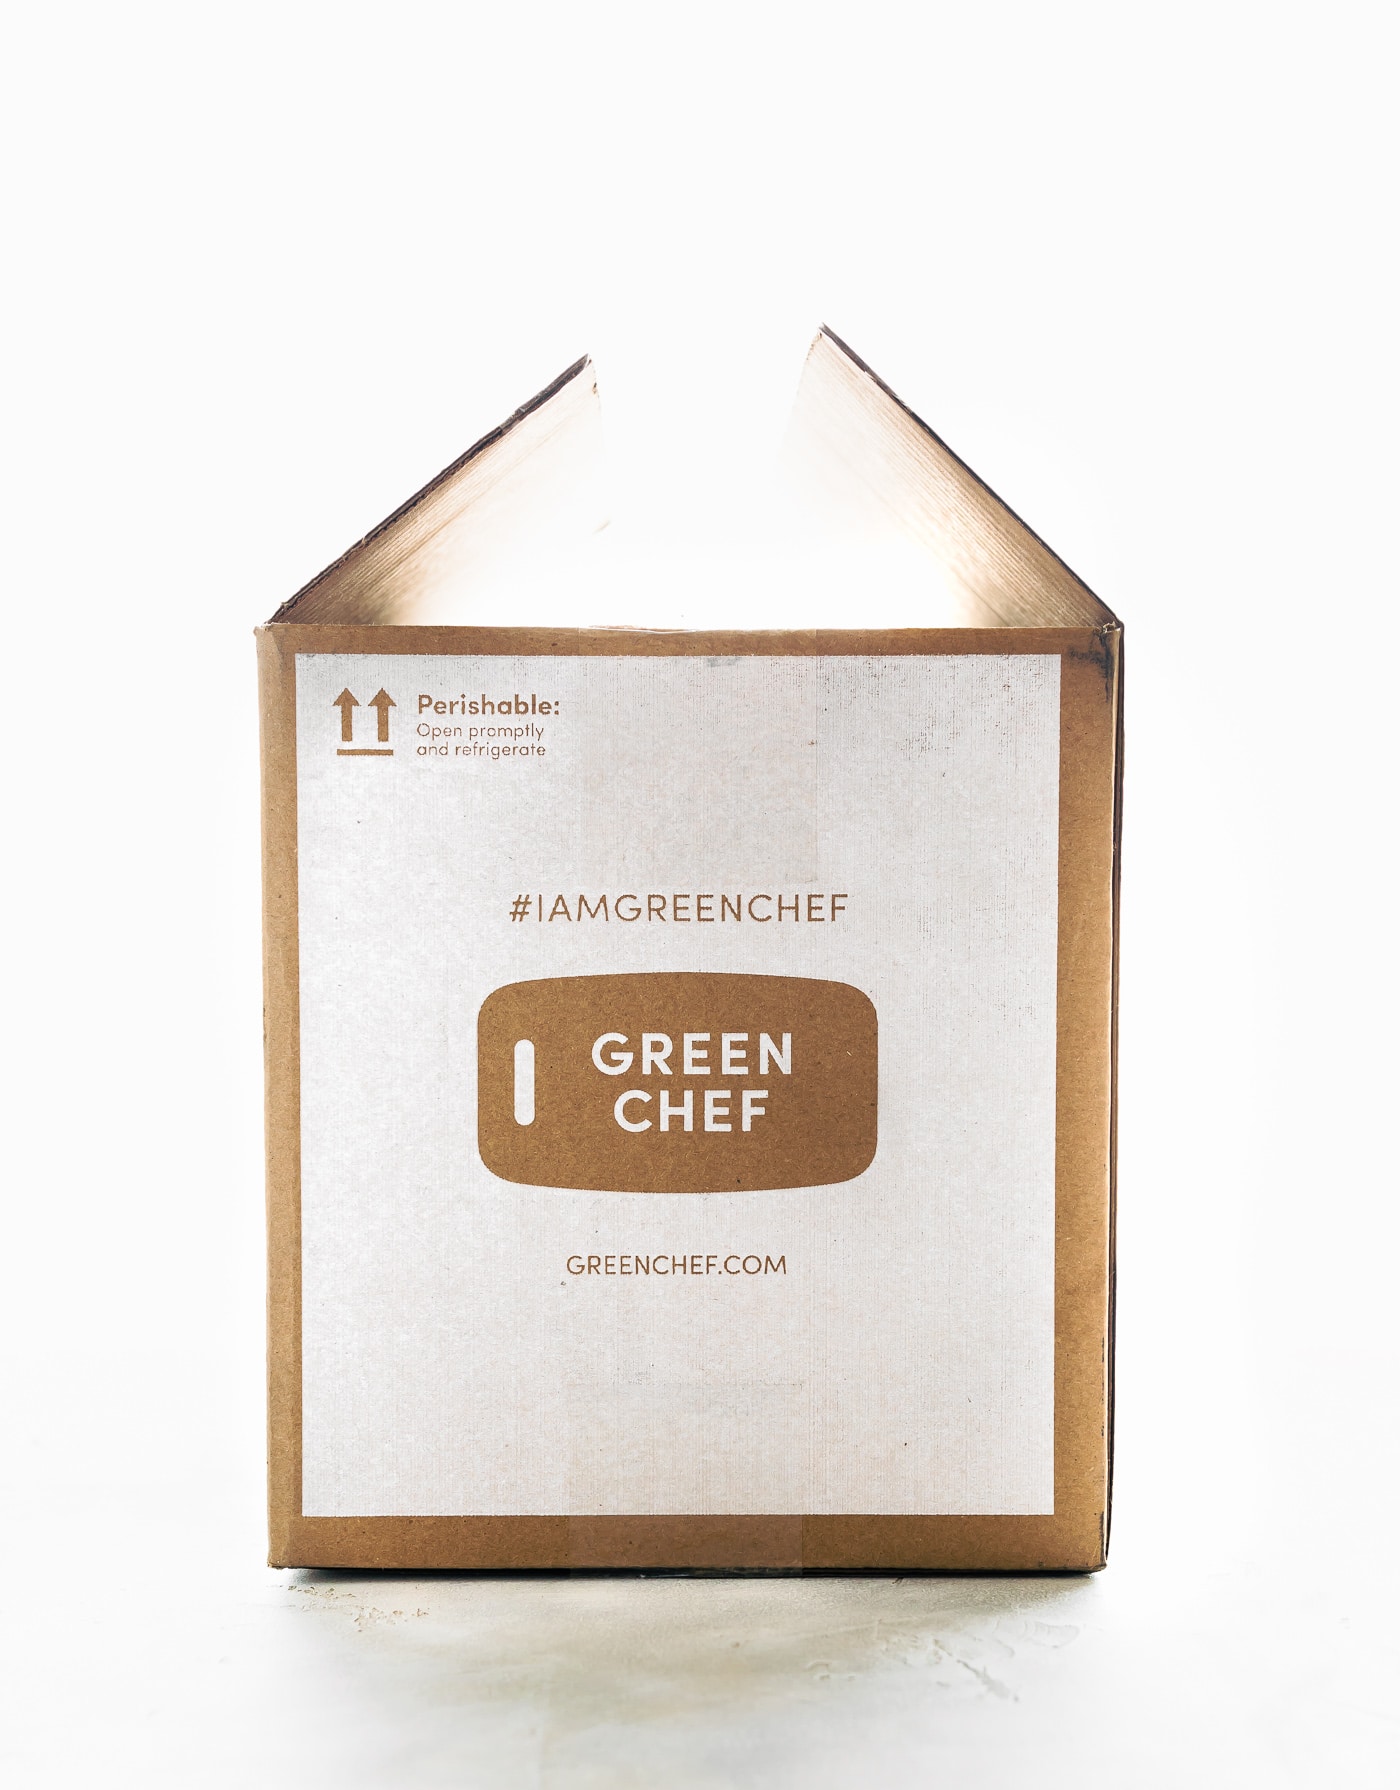 Green Chef organic meal ingredient delivery service box